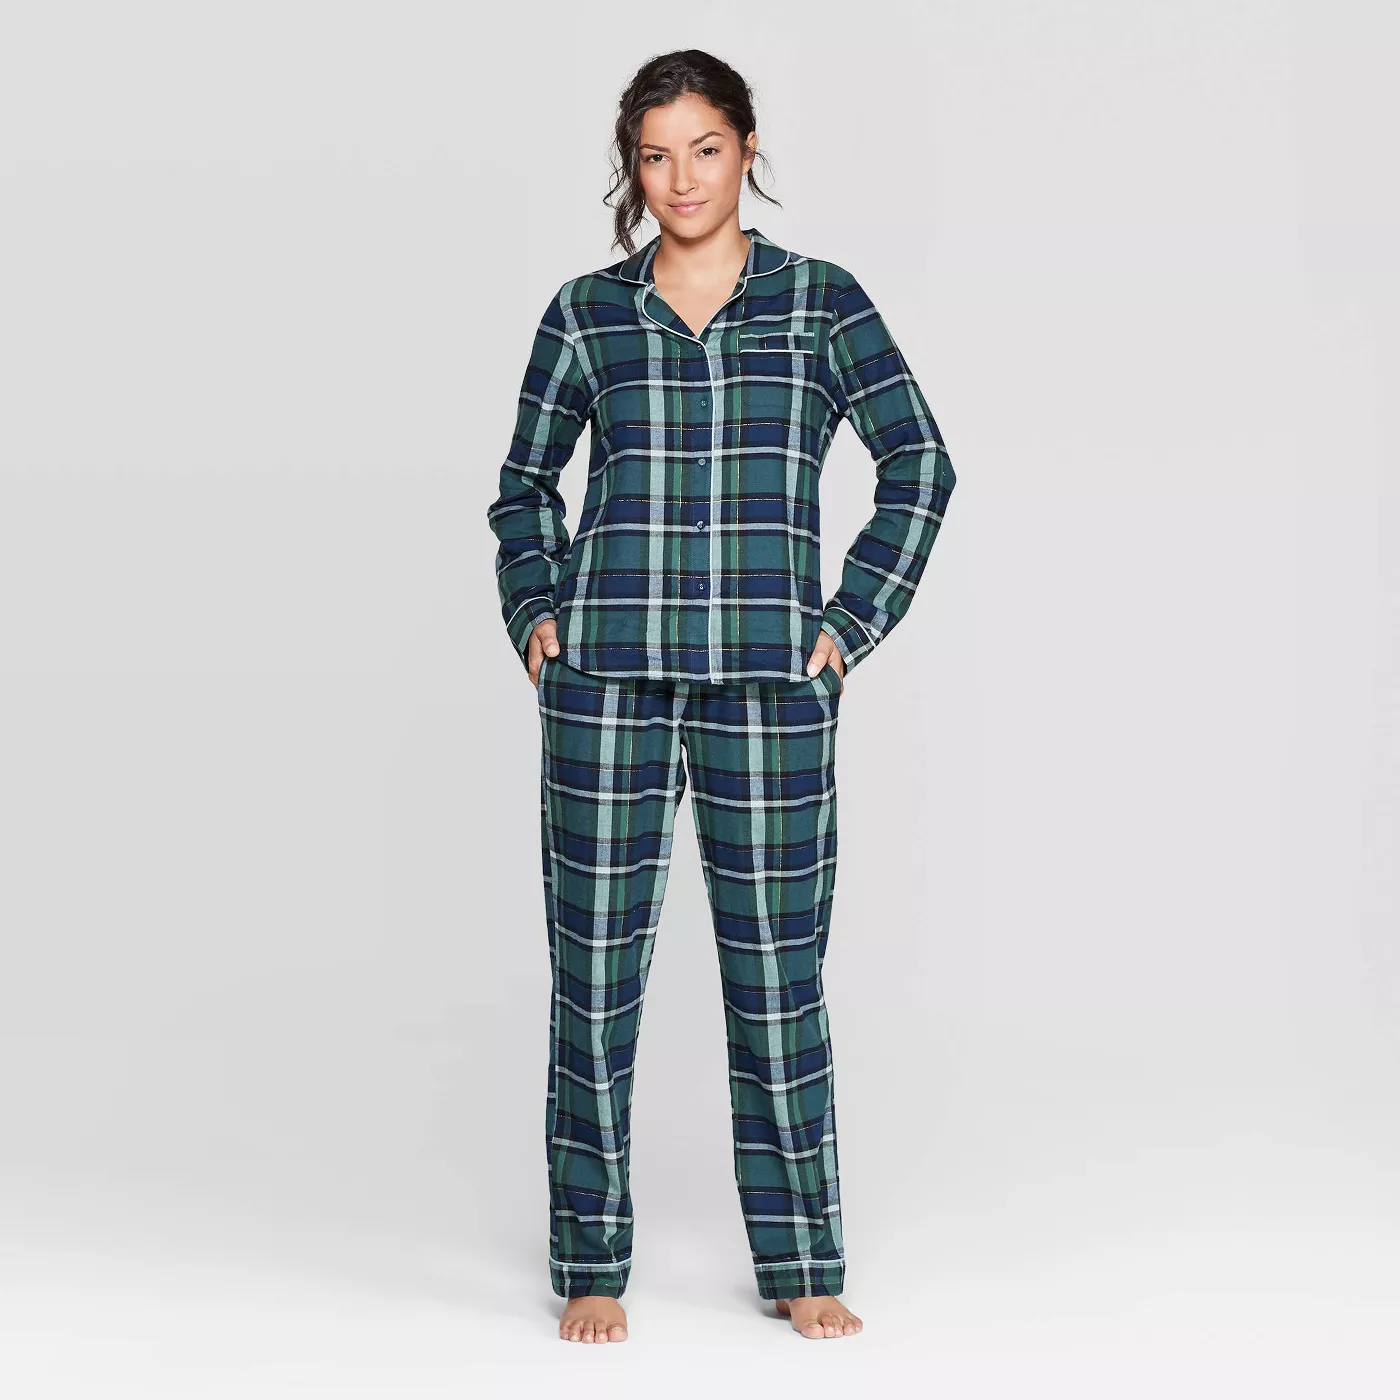 Women's Plaid Perfectly Cozy Flannel Pajama Set - Stars Above™ Green - image 1 of 2